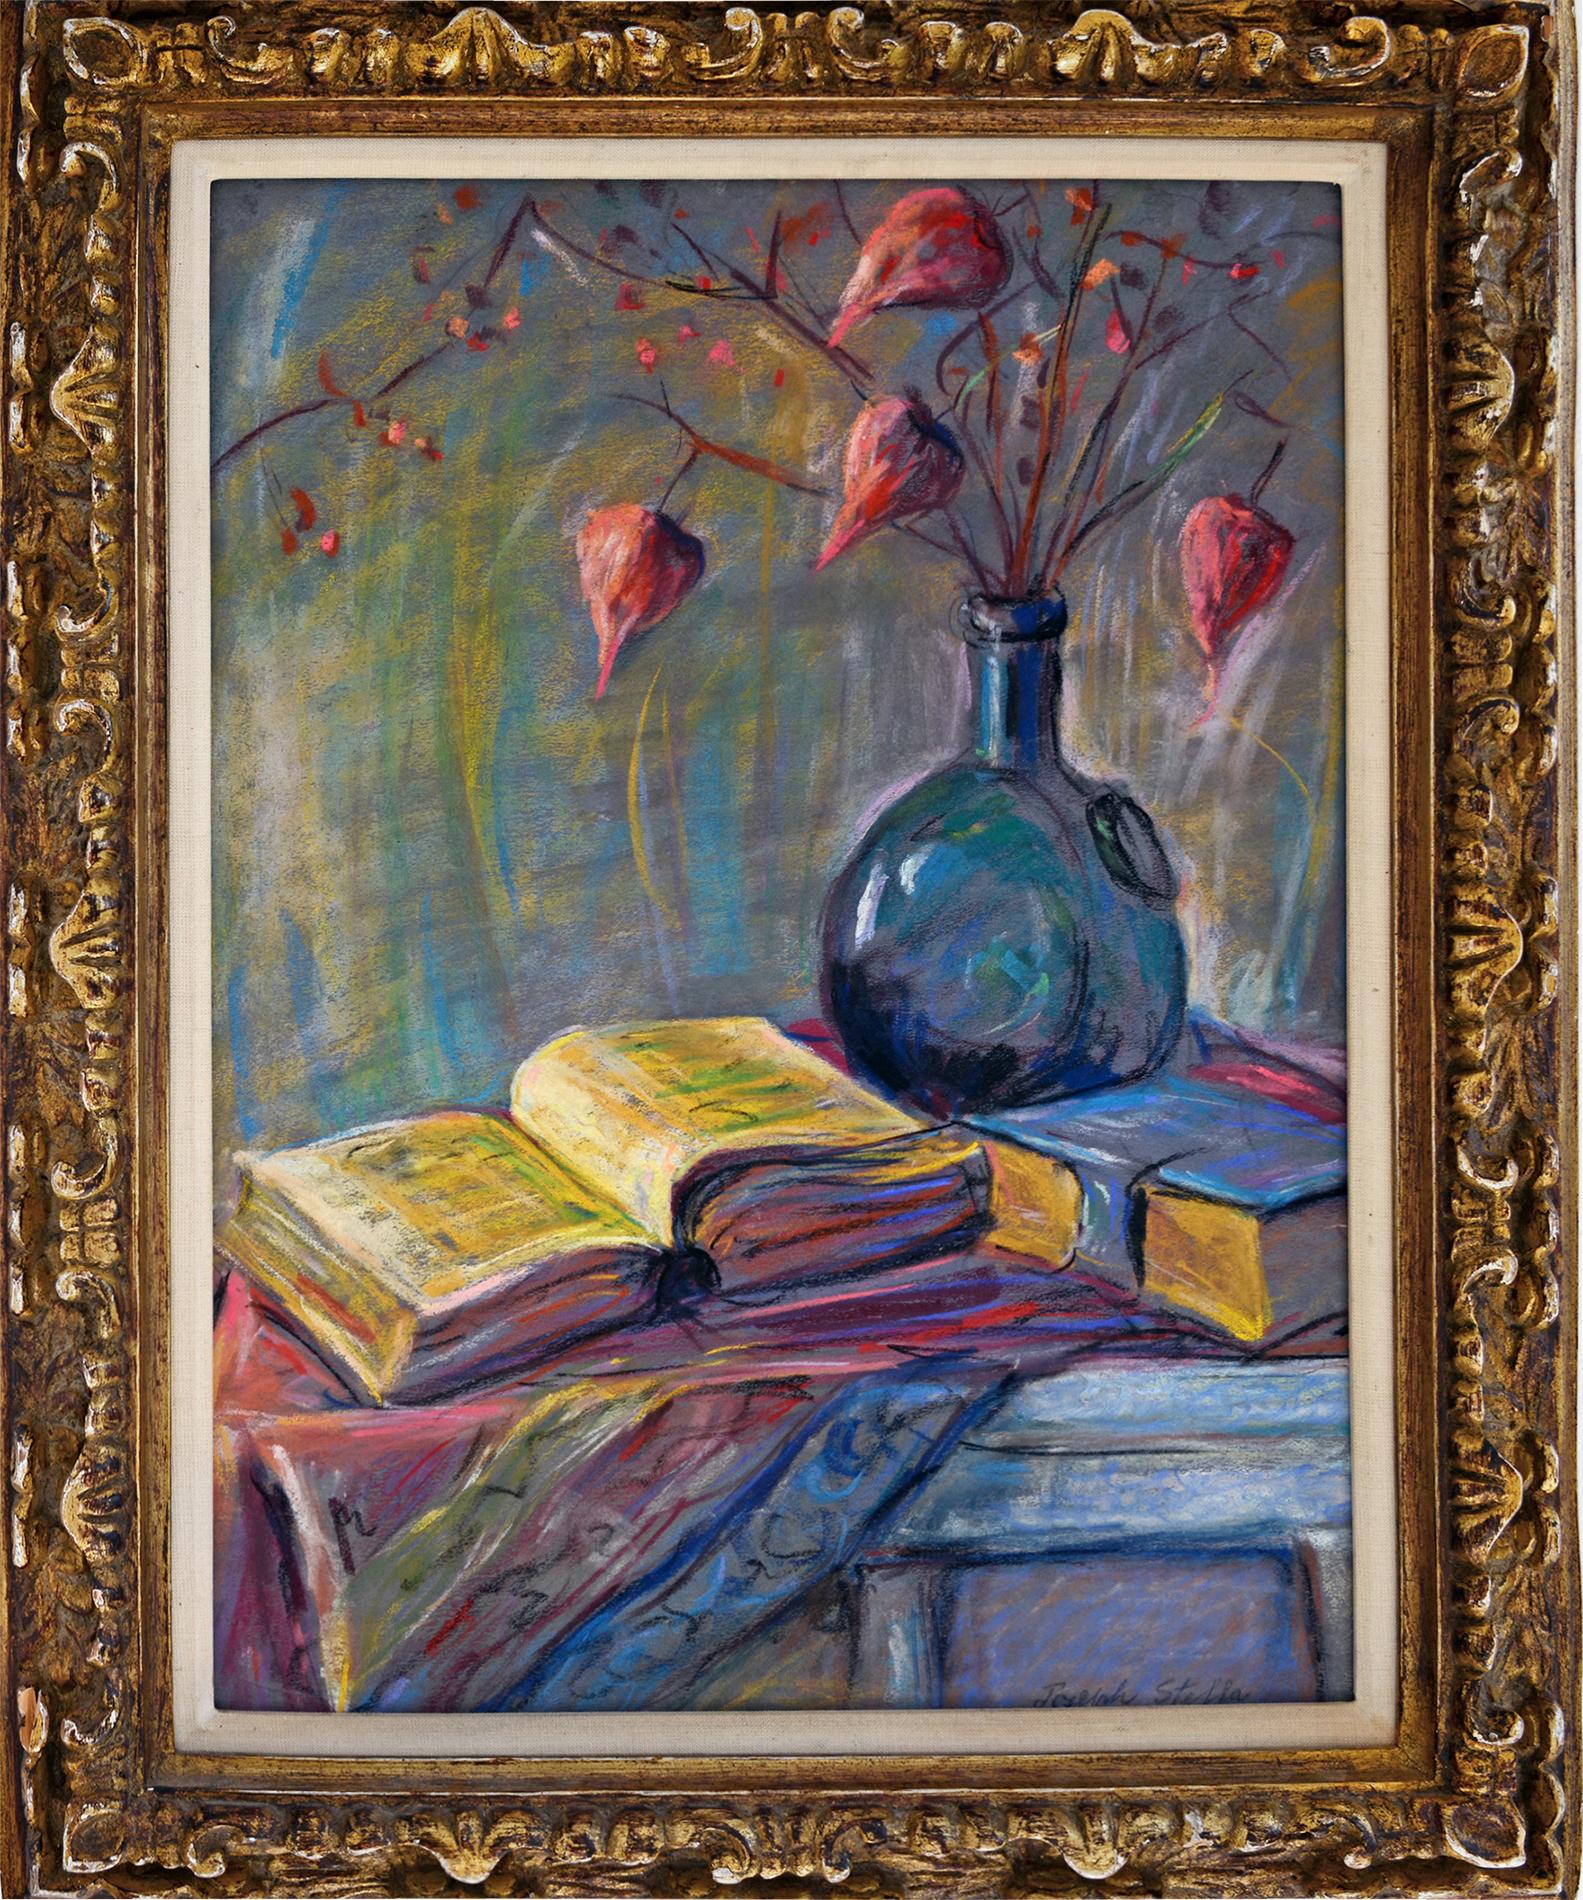 Joseph Stella creates a beautiful and colorful still life rendered in lush expressive bright colors and quick spontaneous bravura brushstrokes.. Signed Lower Right  Joseph Stella Framed under glass